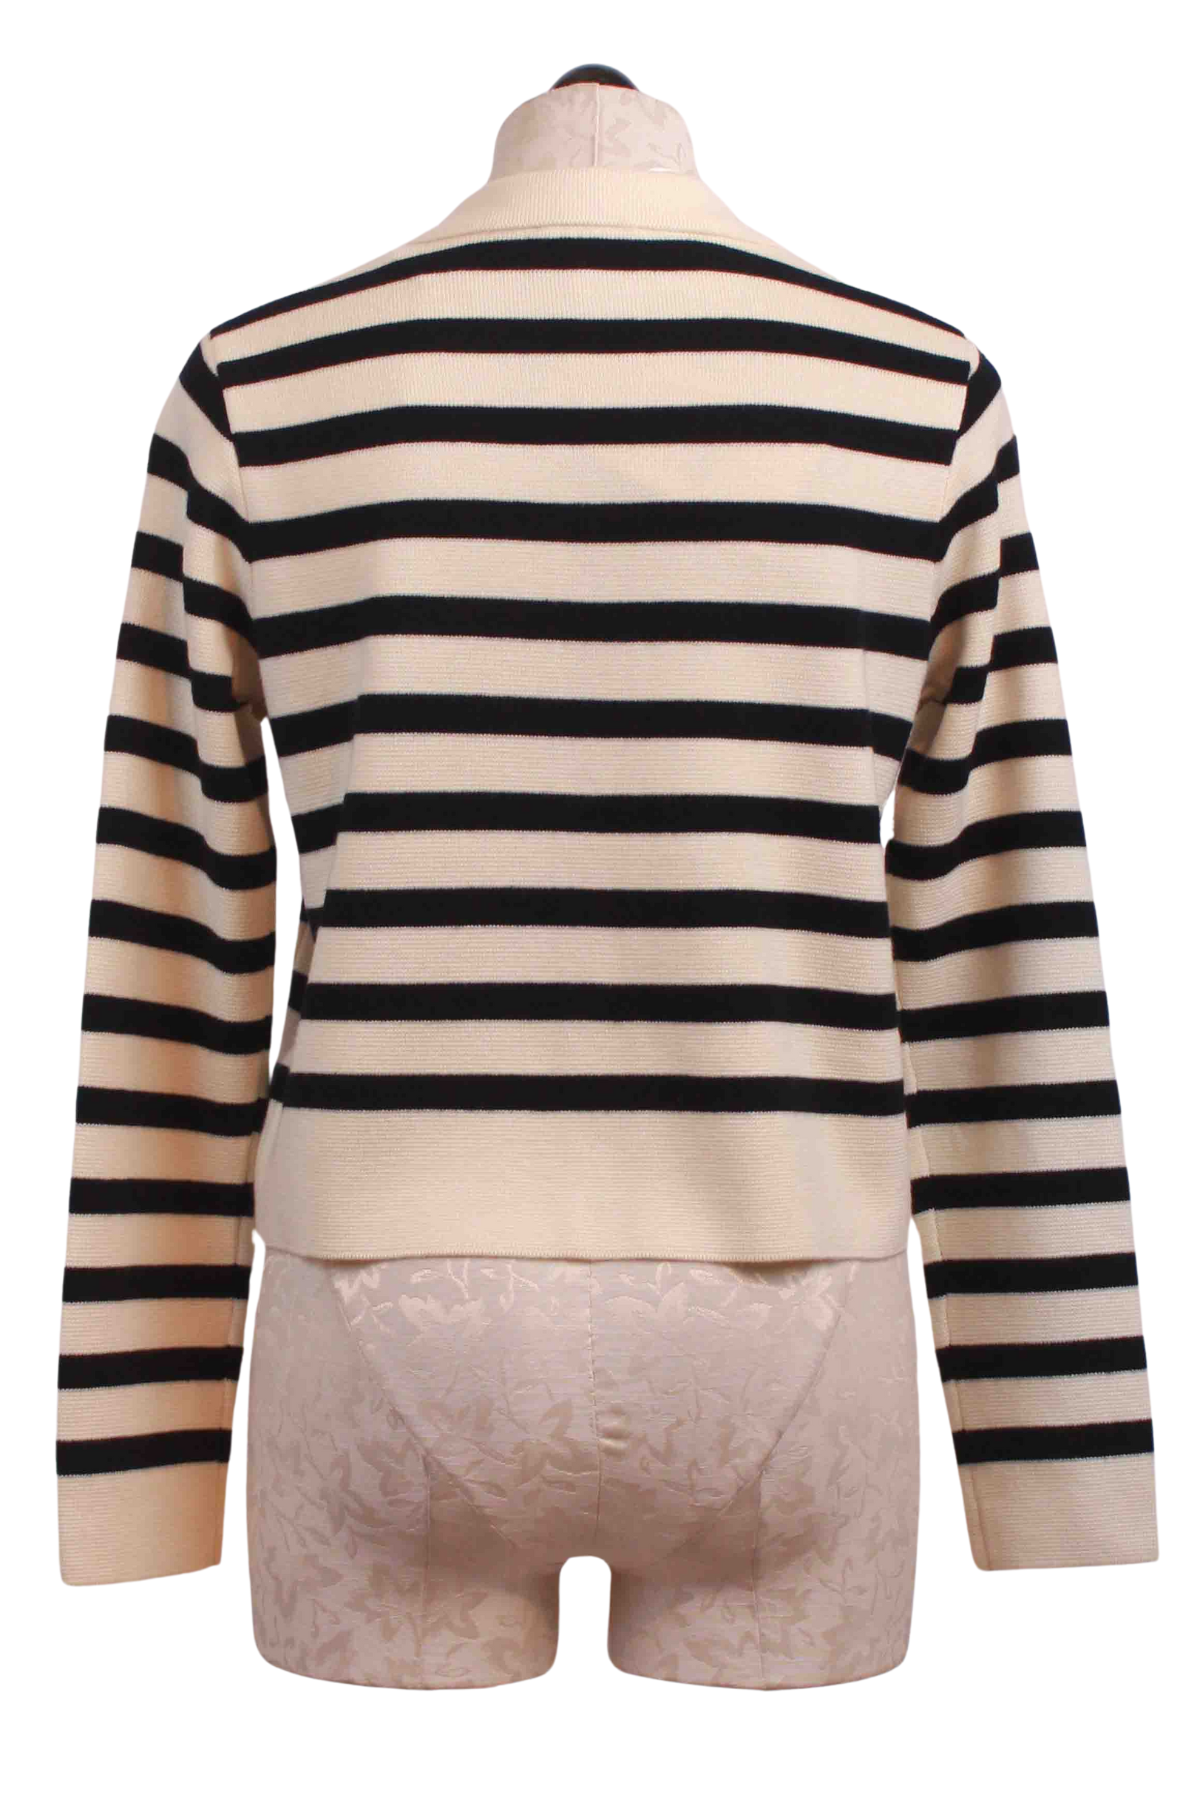 back view of Black and Cream Stripe Maelys Sweater Jacket by Grace and Mila